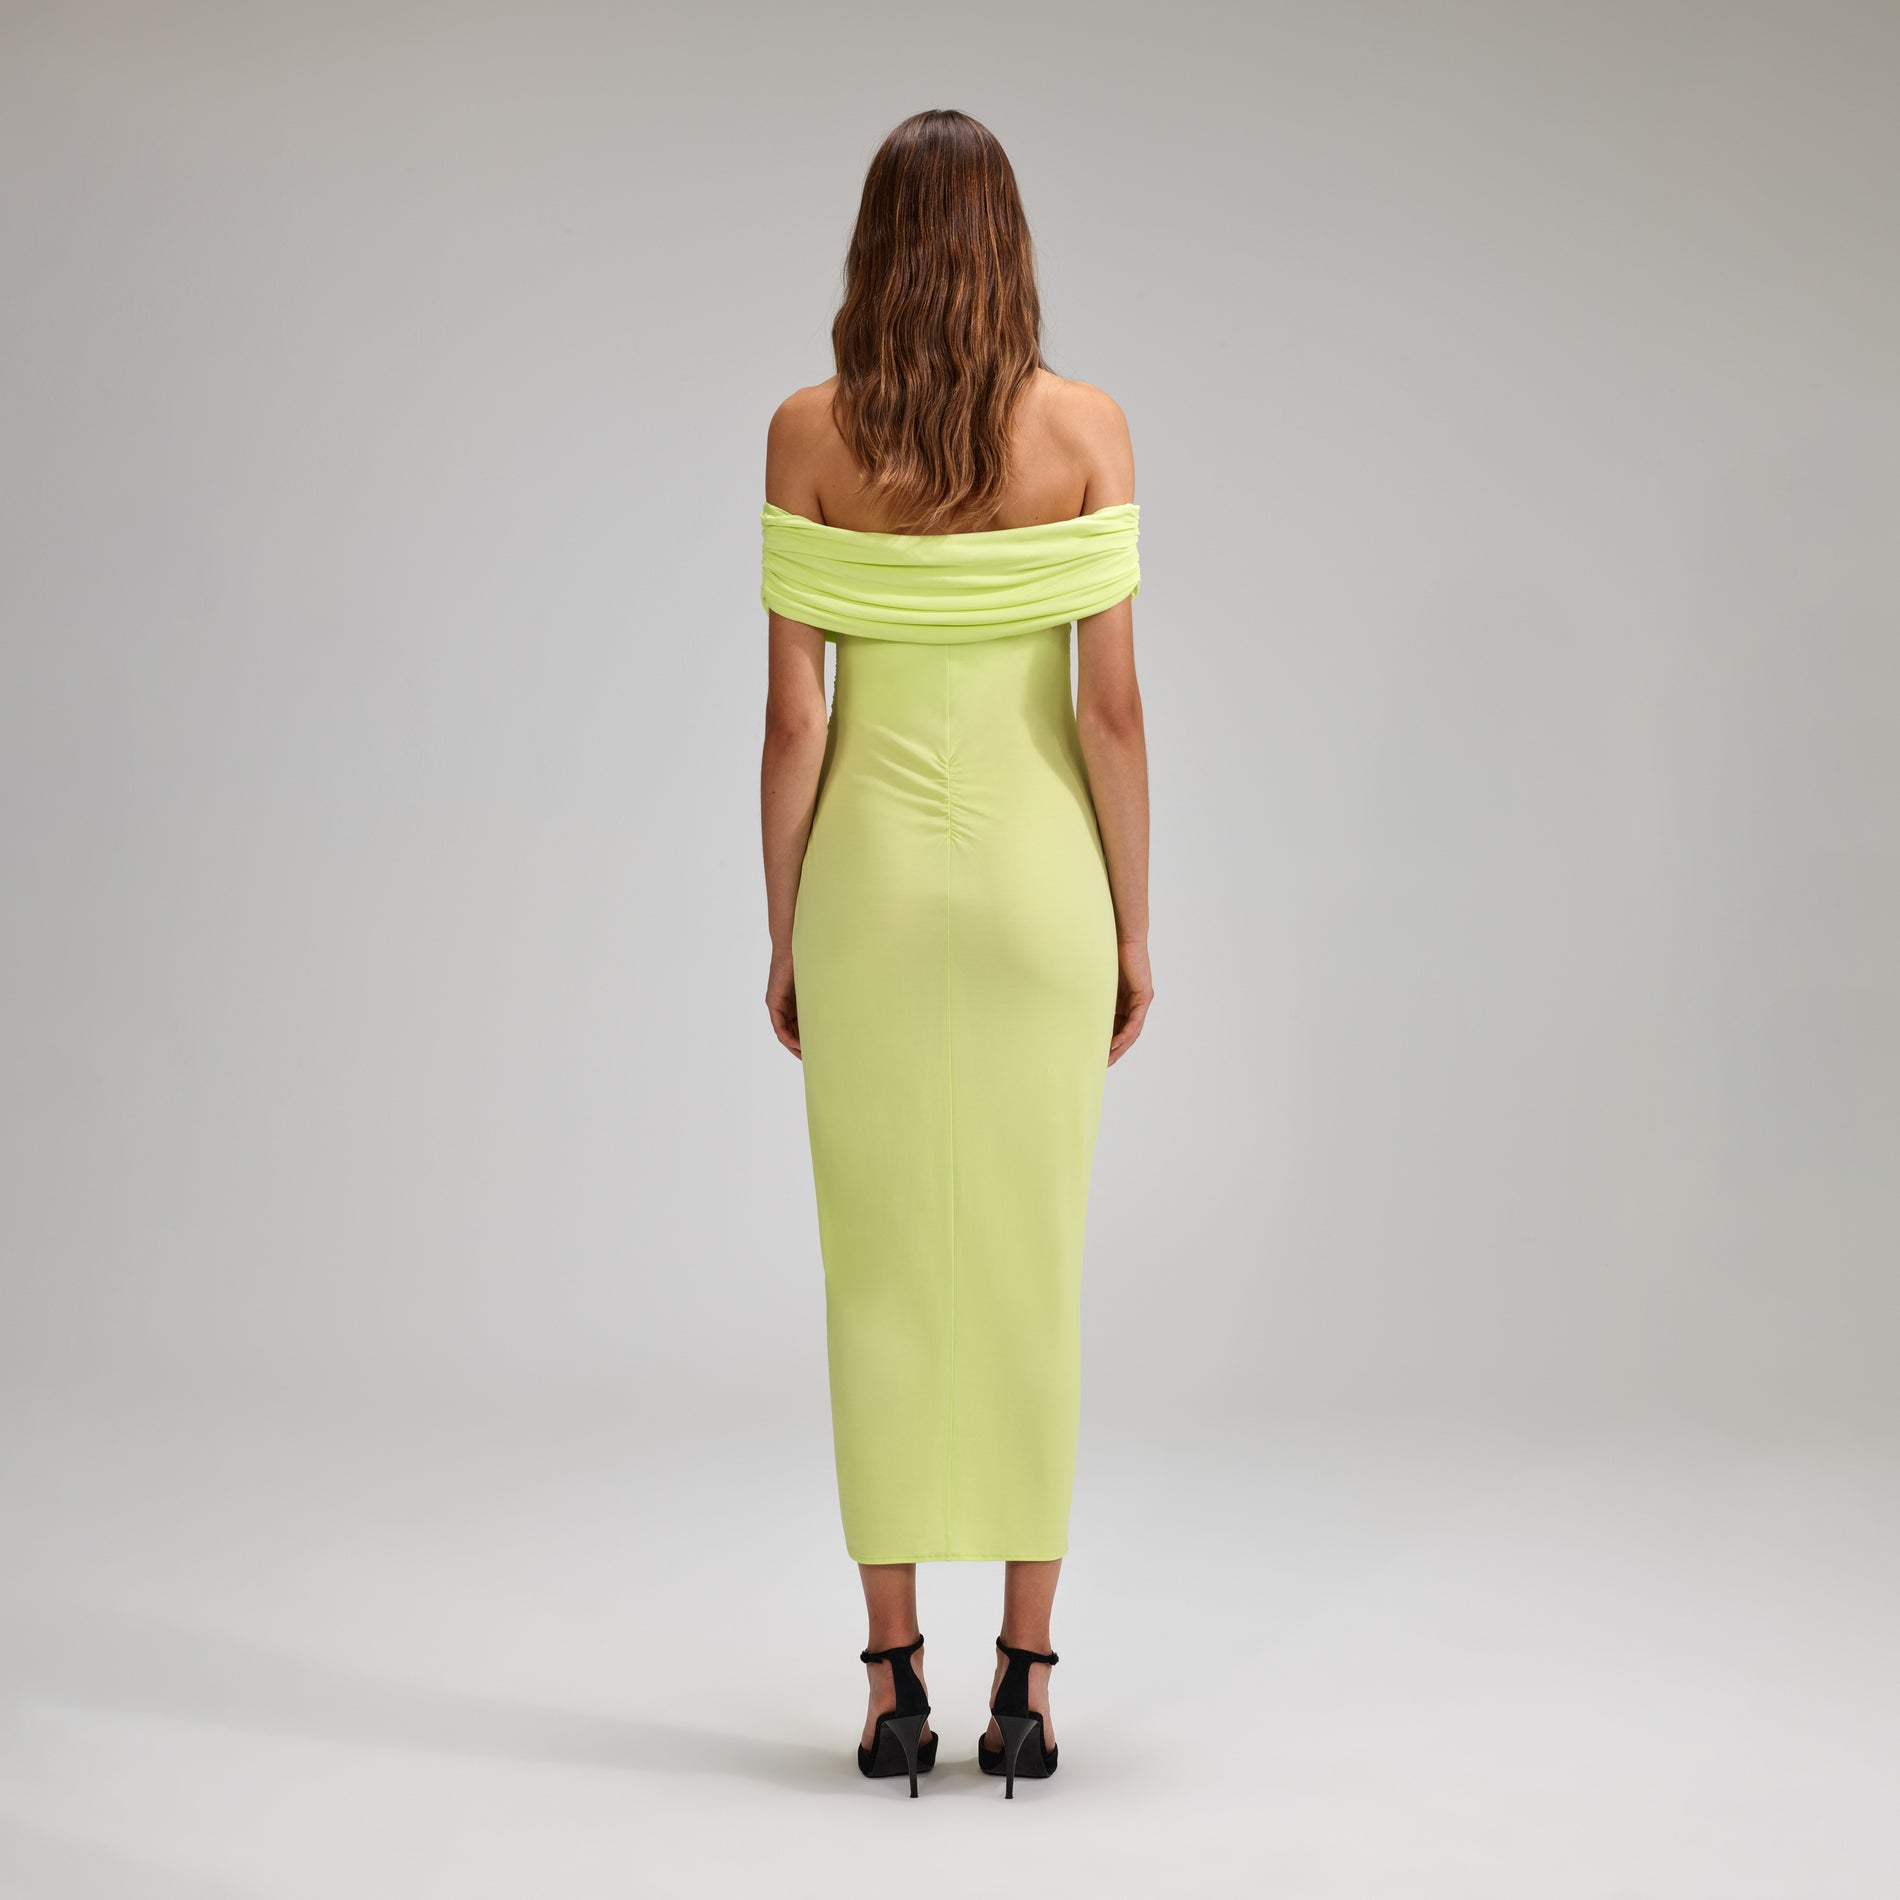 A woman wearing the Lime Jersey Off-Shoulder Midi Dress